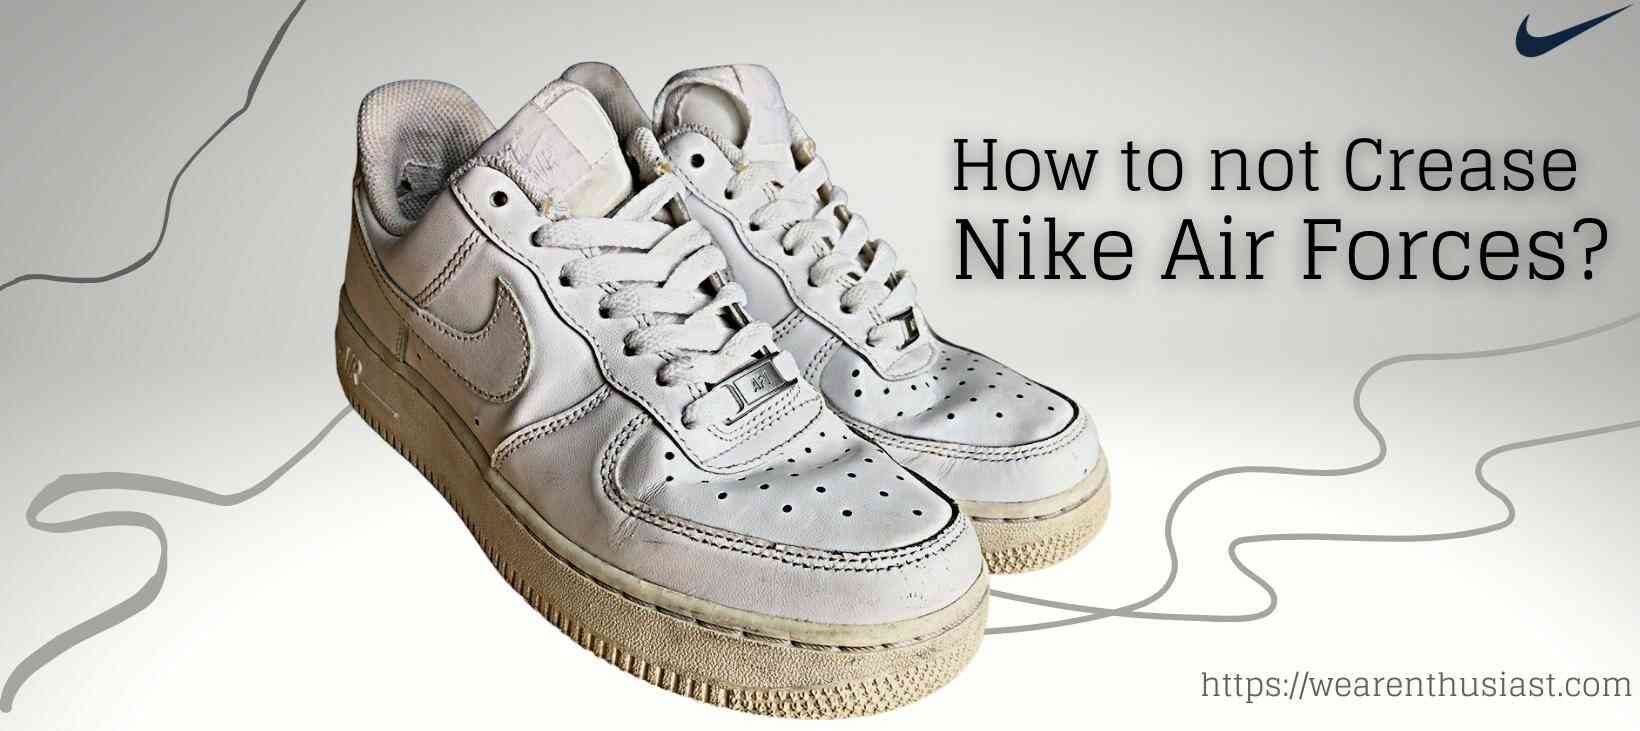 How to not Crease Nike Air Forces?